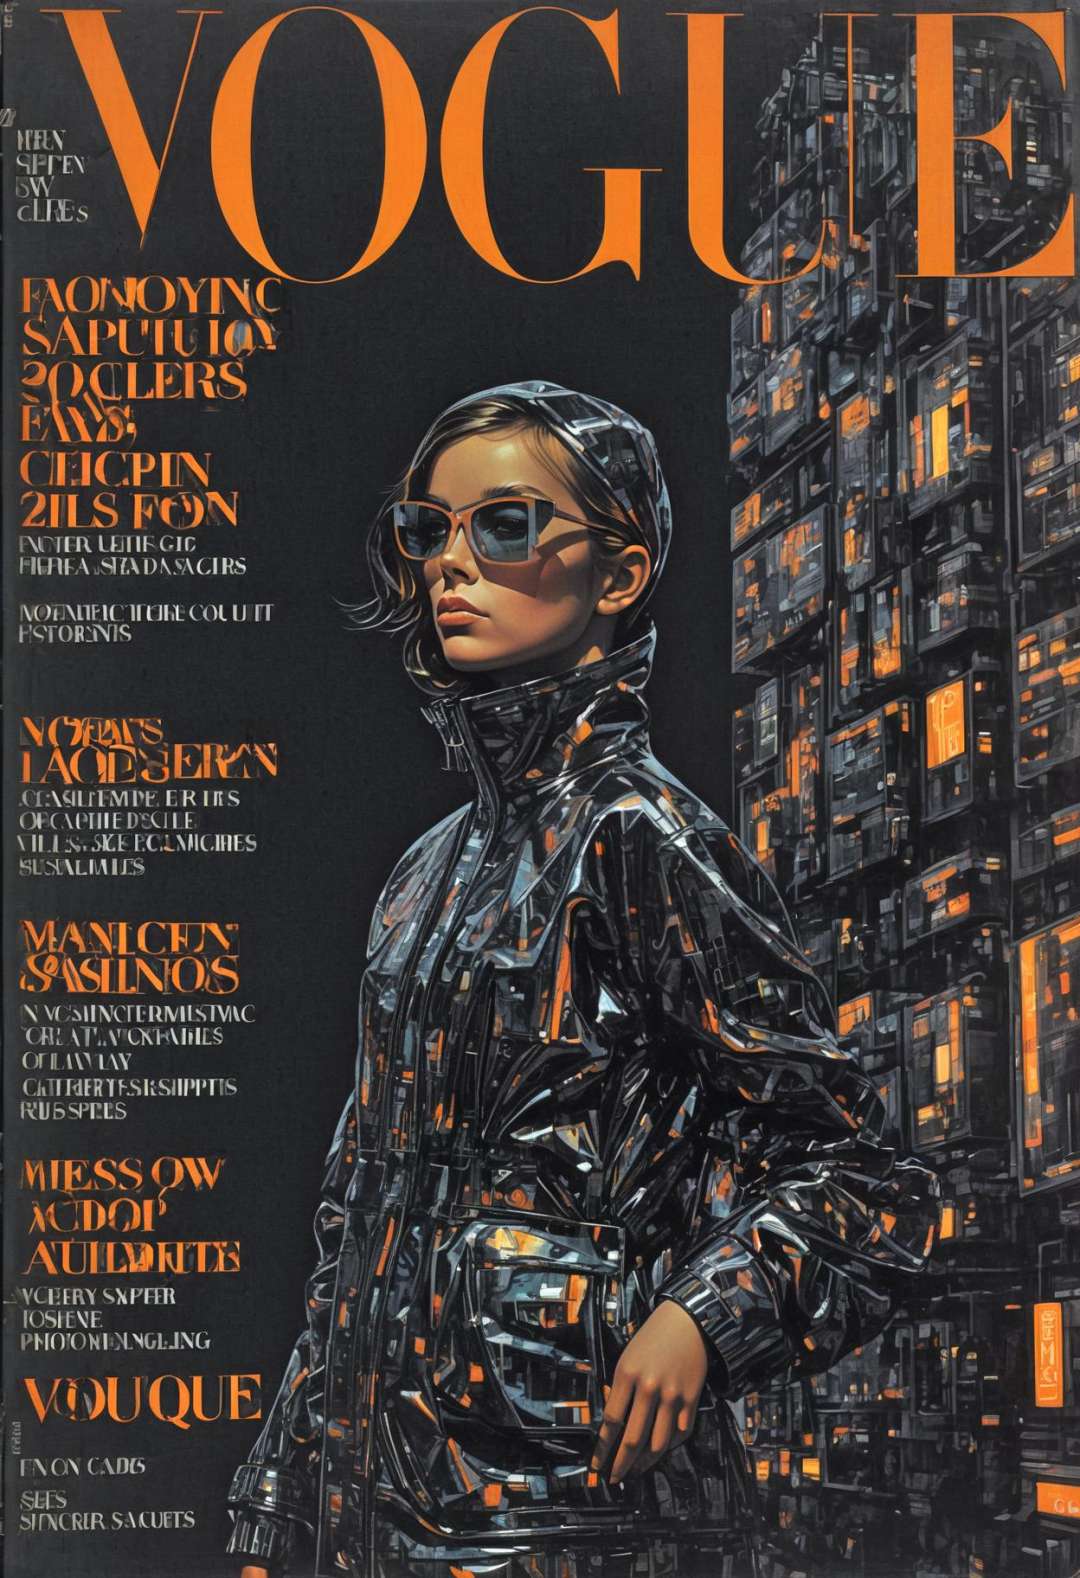 She, futuristic materials, urban chic, neon streetlights, reflective surfaces, avant-garde design, cyberpunk vibes, GQ Style Magazine, neon-lit cityscape.,highly intricate,(VOGUE Cover Magazine:1.15),1968, 60s, black letters, hyper detailed, photorealistic,,